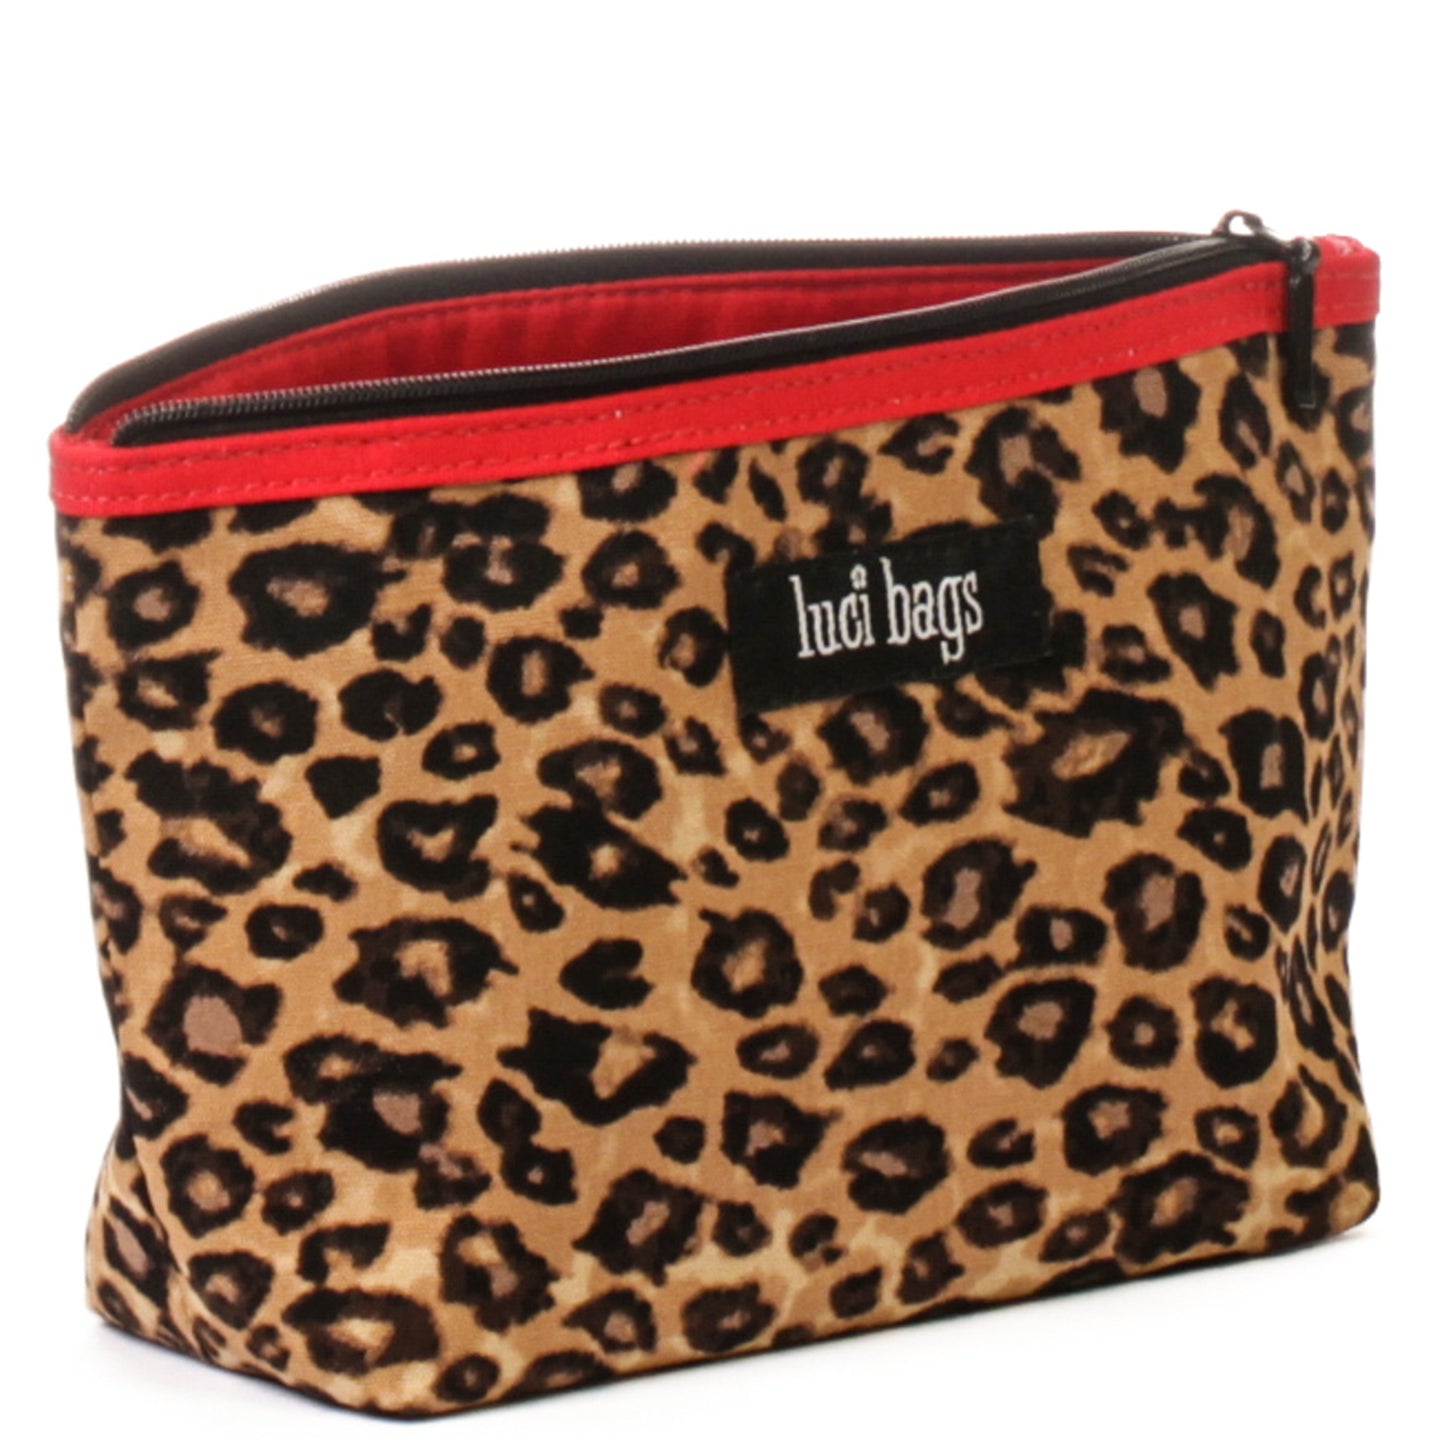 Leopard Small Pouch